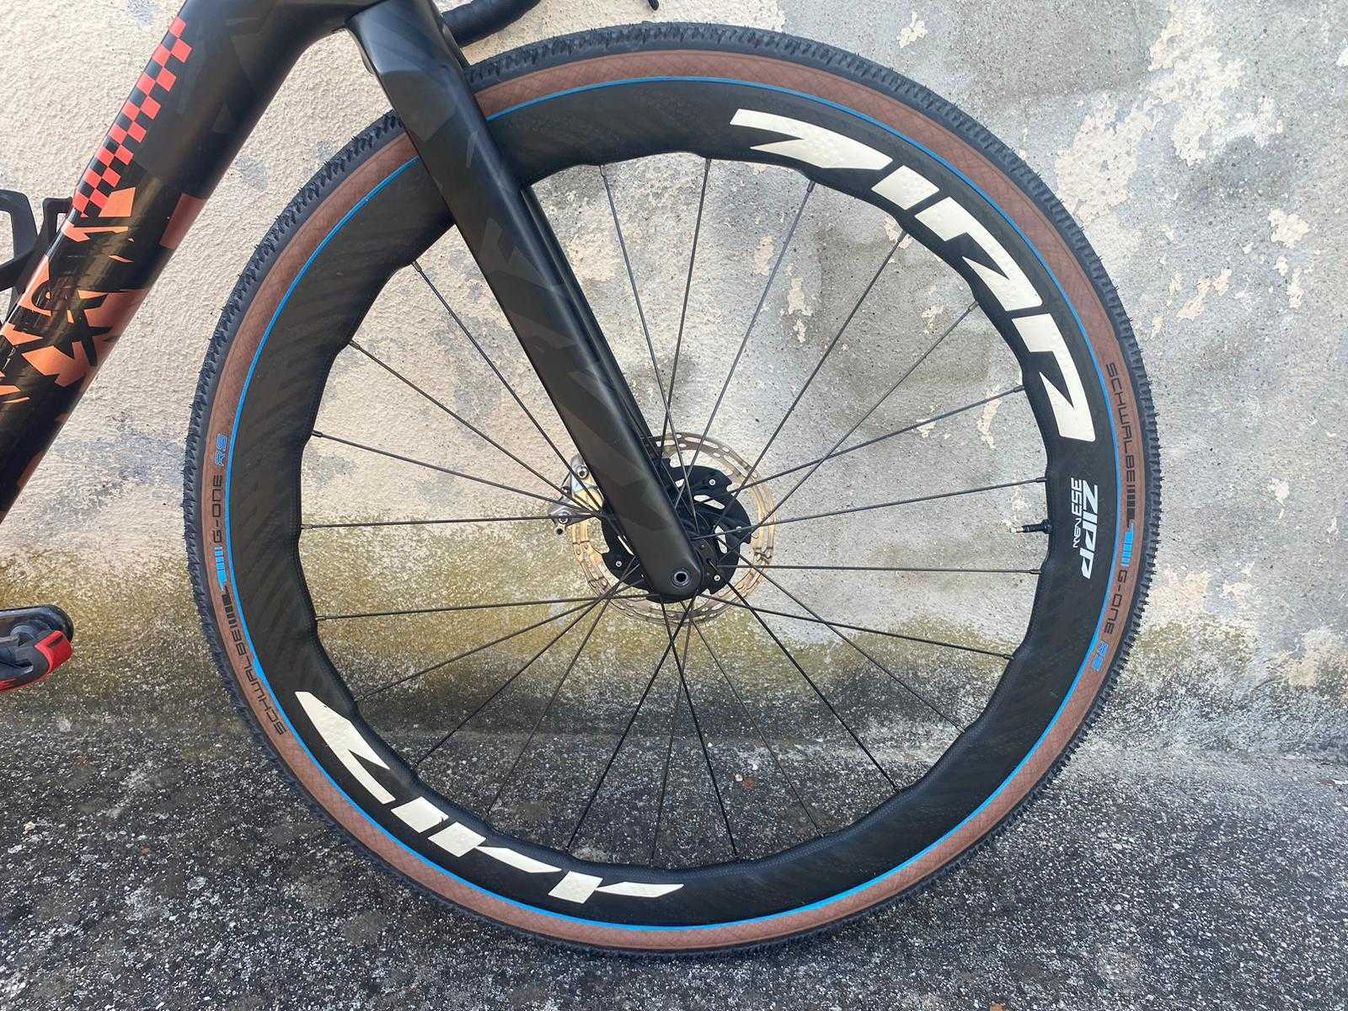 The Schwalbe G-One RS is built for speed